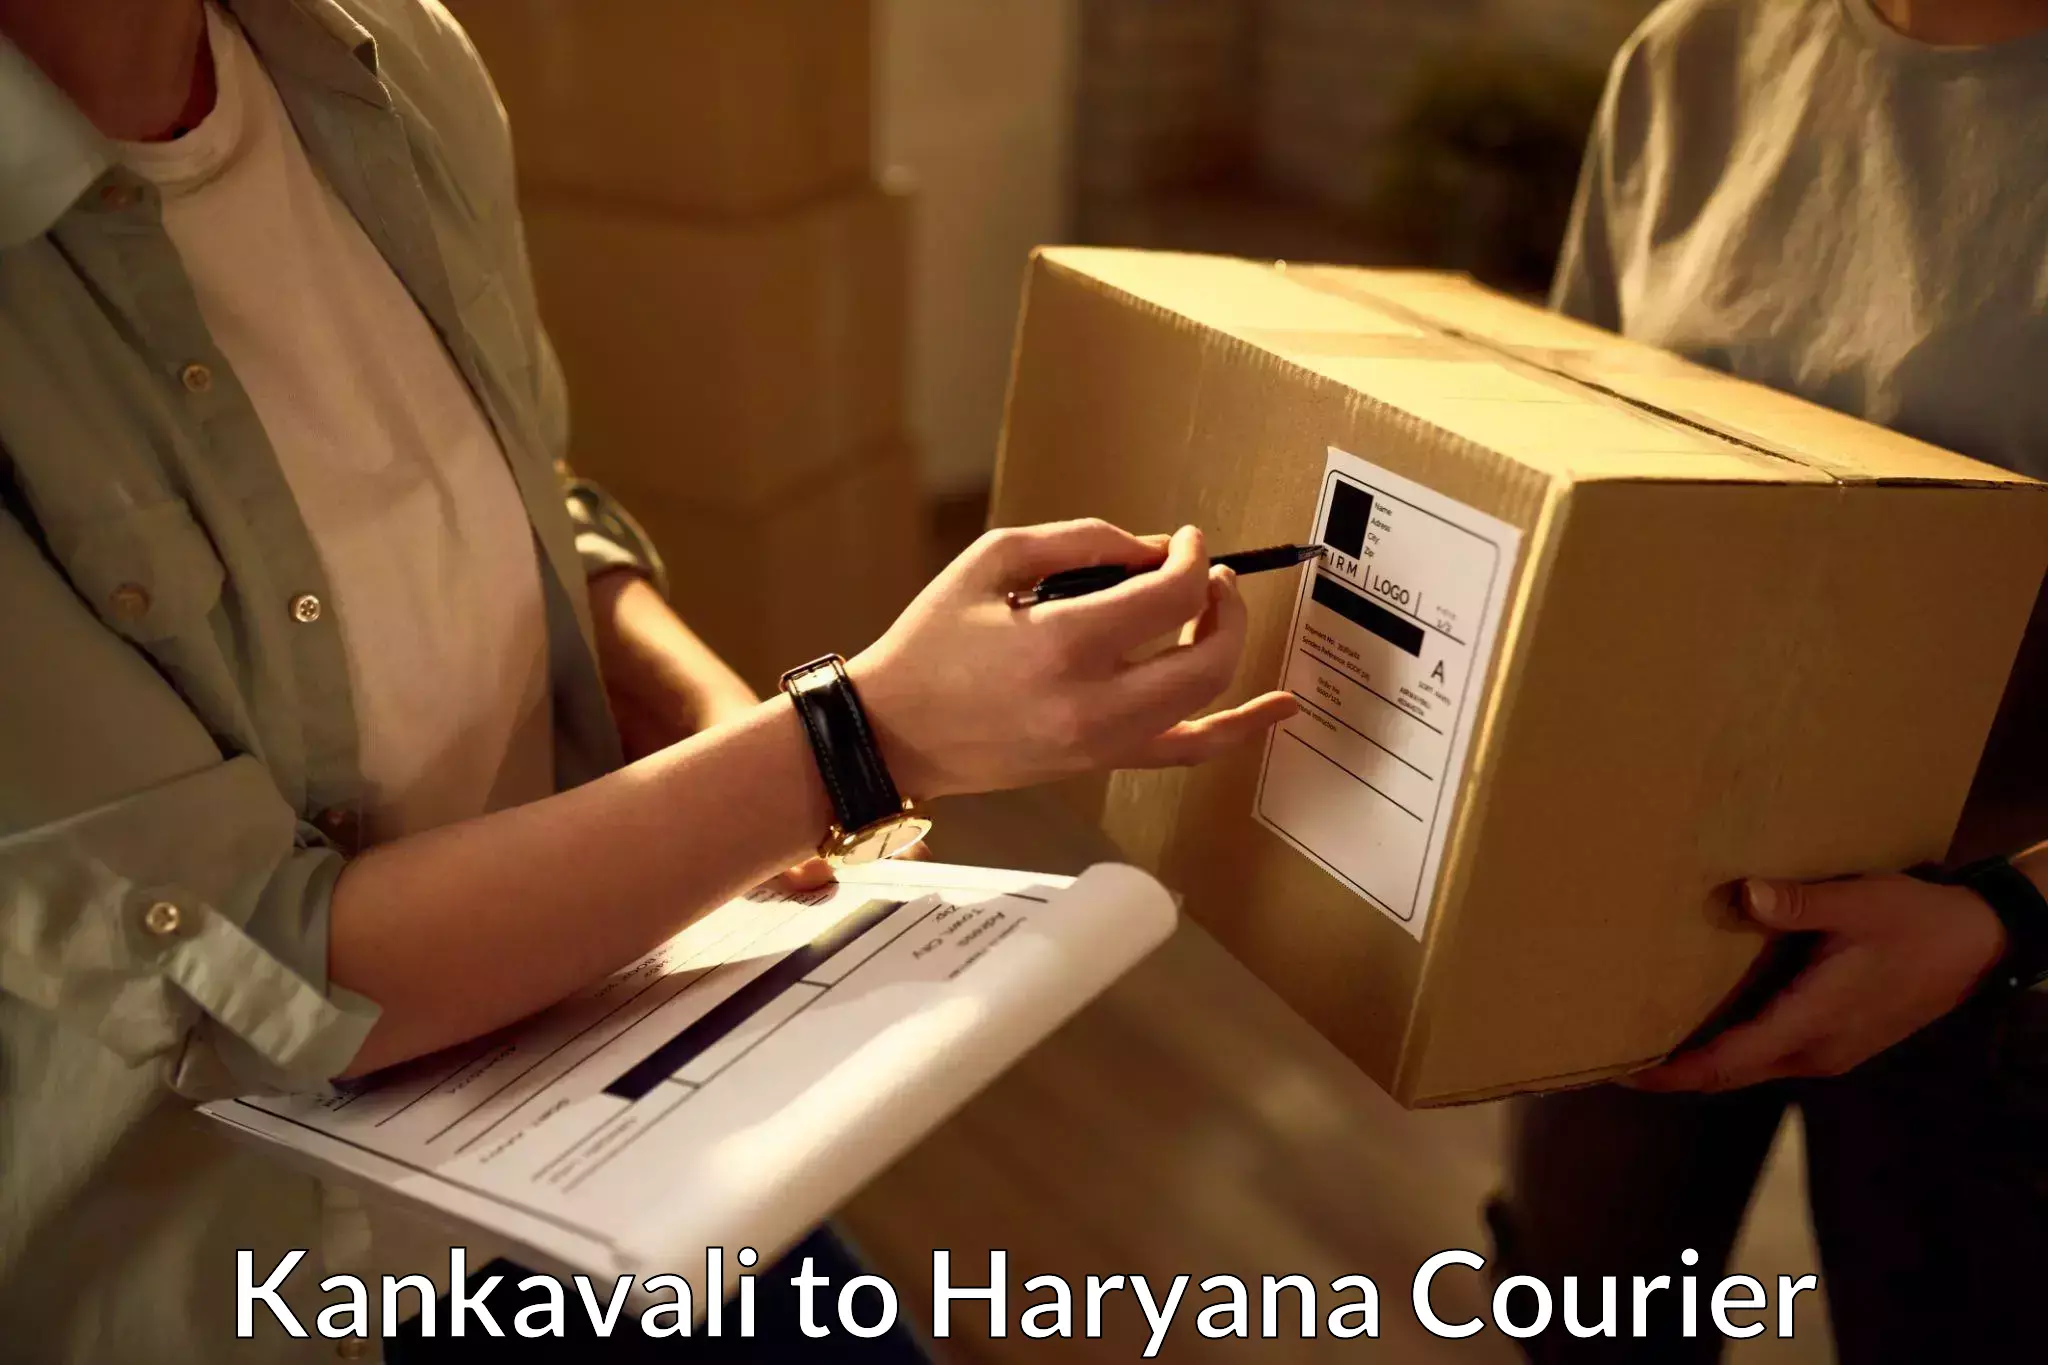 Flexible delivery scheduling in Kankavali to Gurgaon